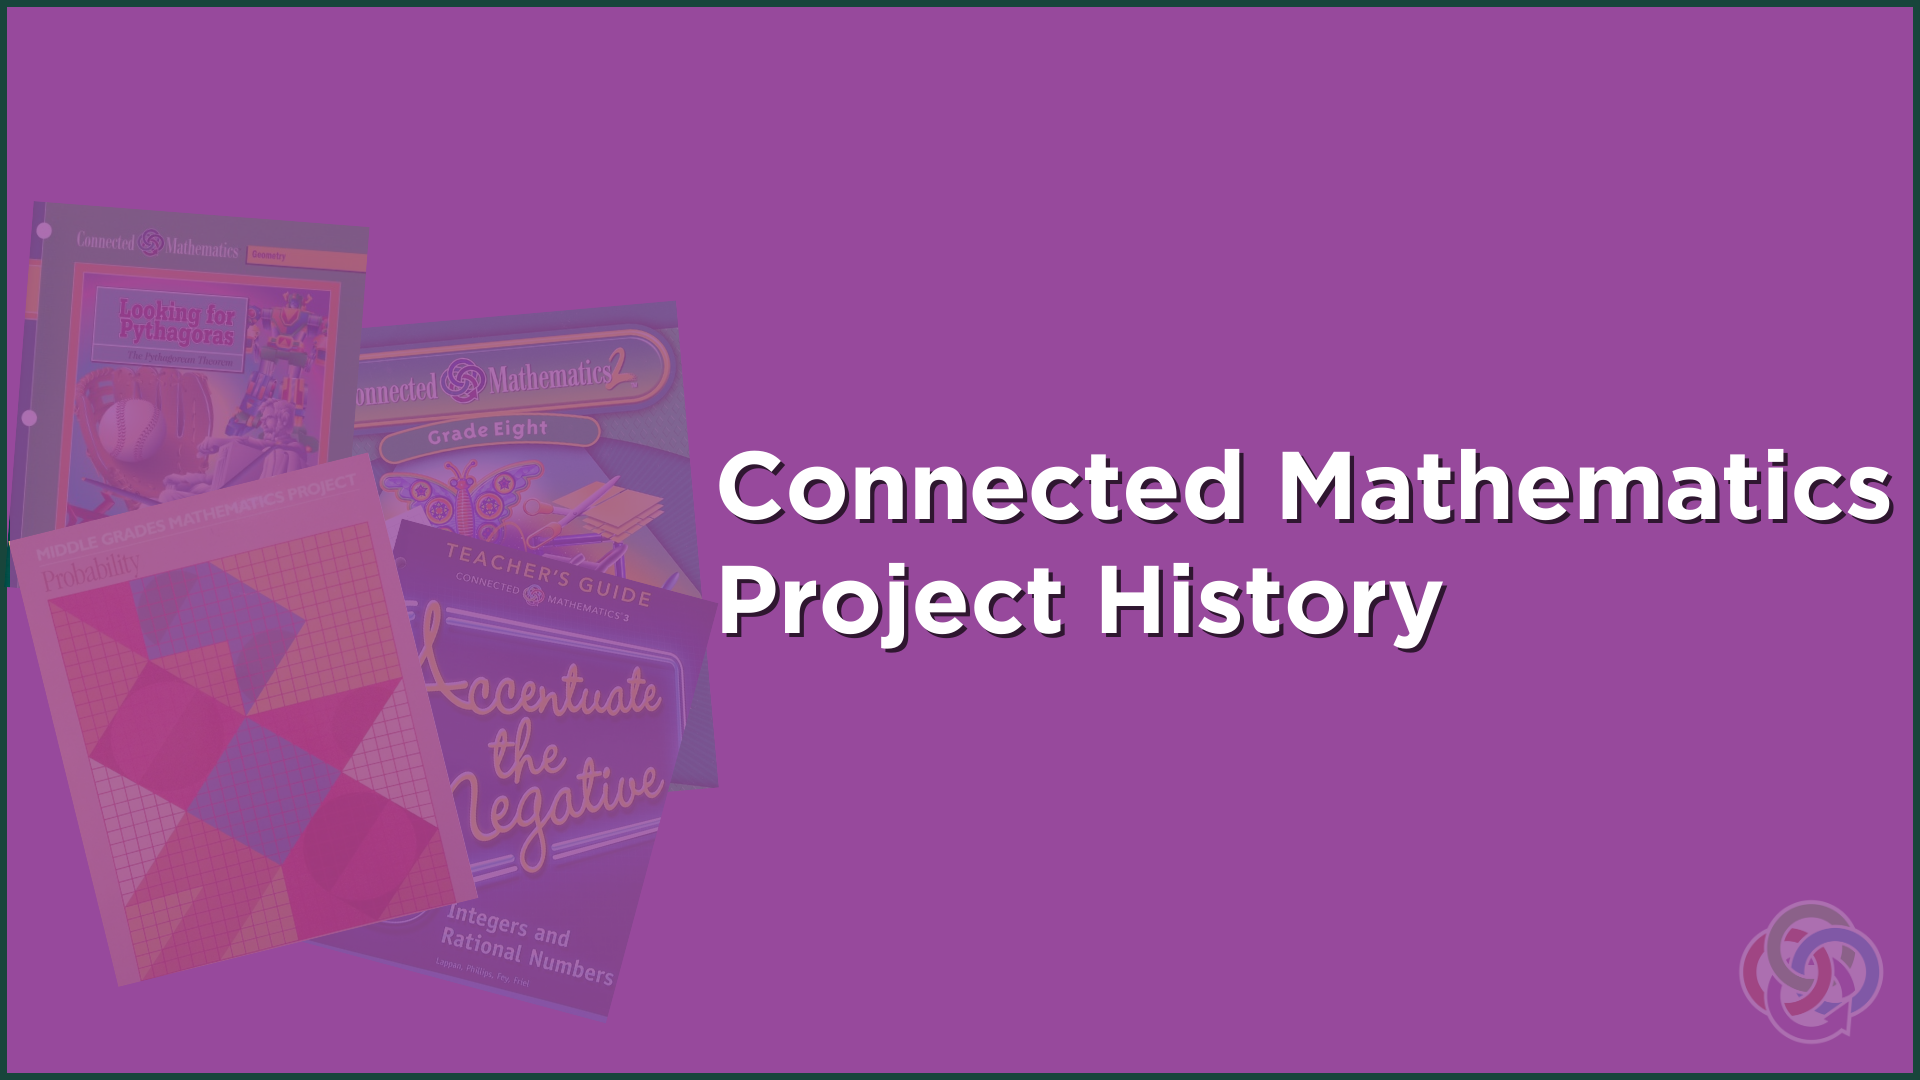 Learn About History of Connected Mathematics Project